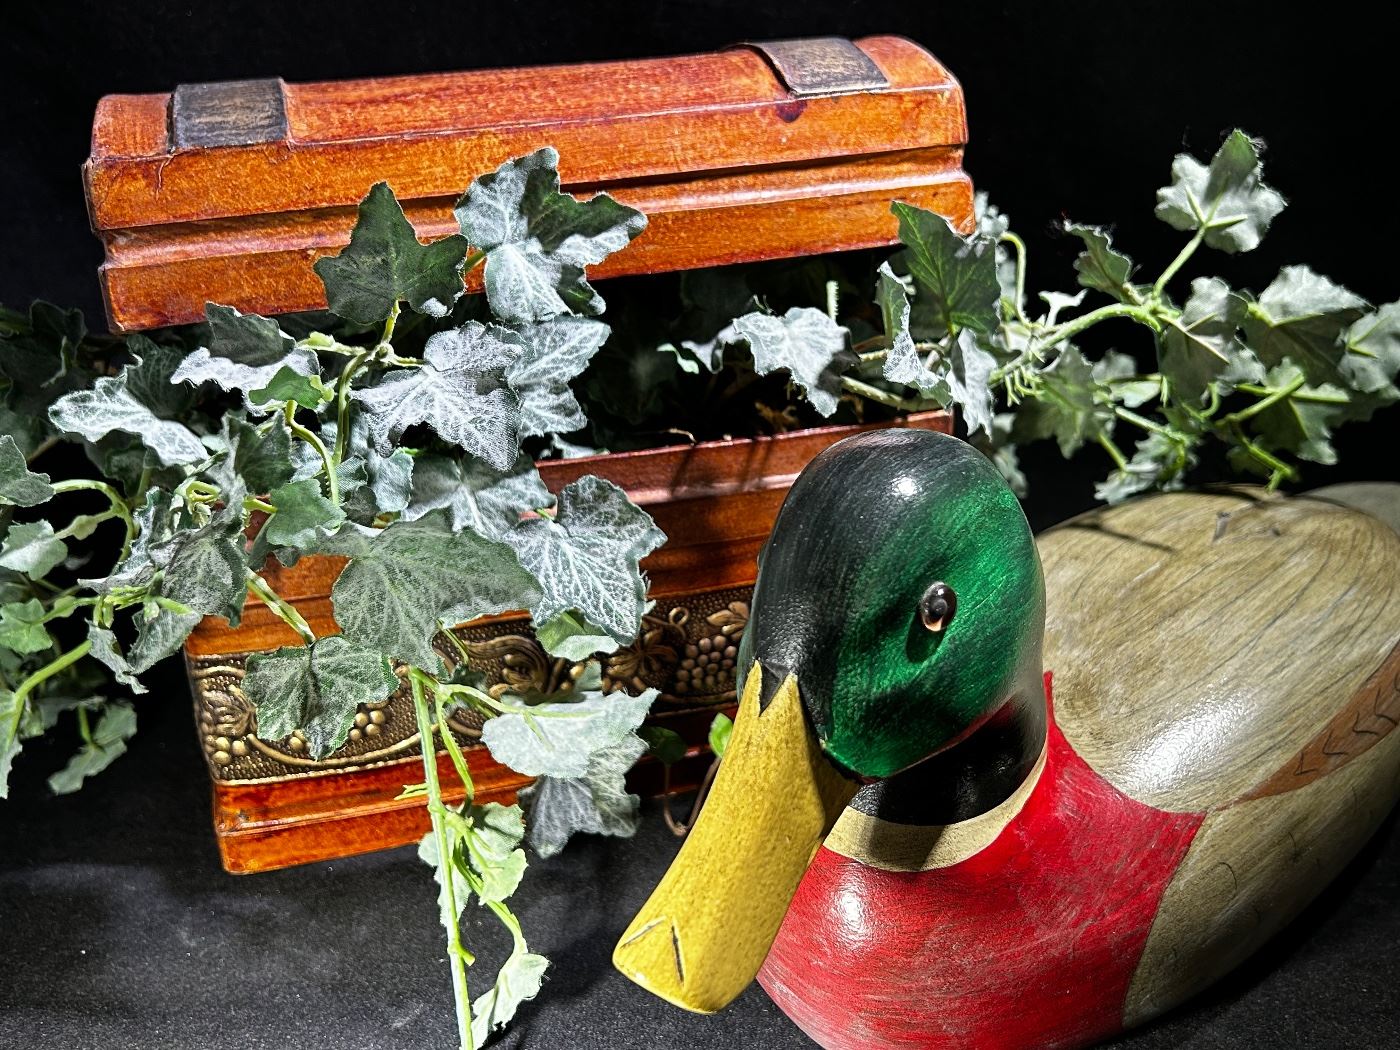 Decorative wooden chest and wooden carved mallard